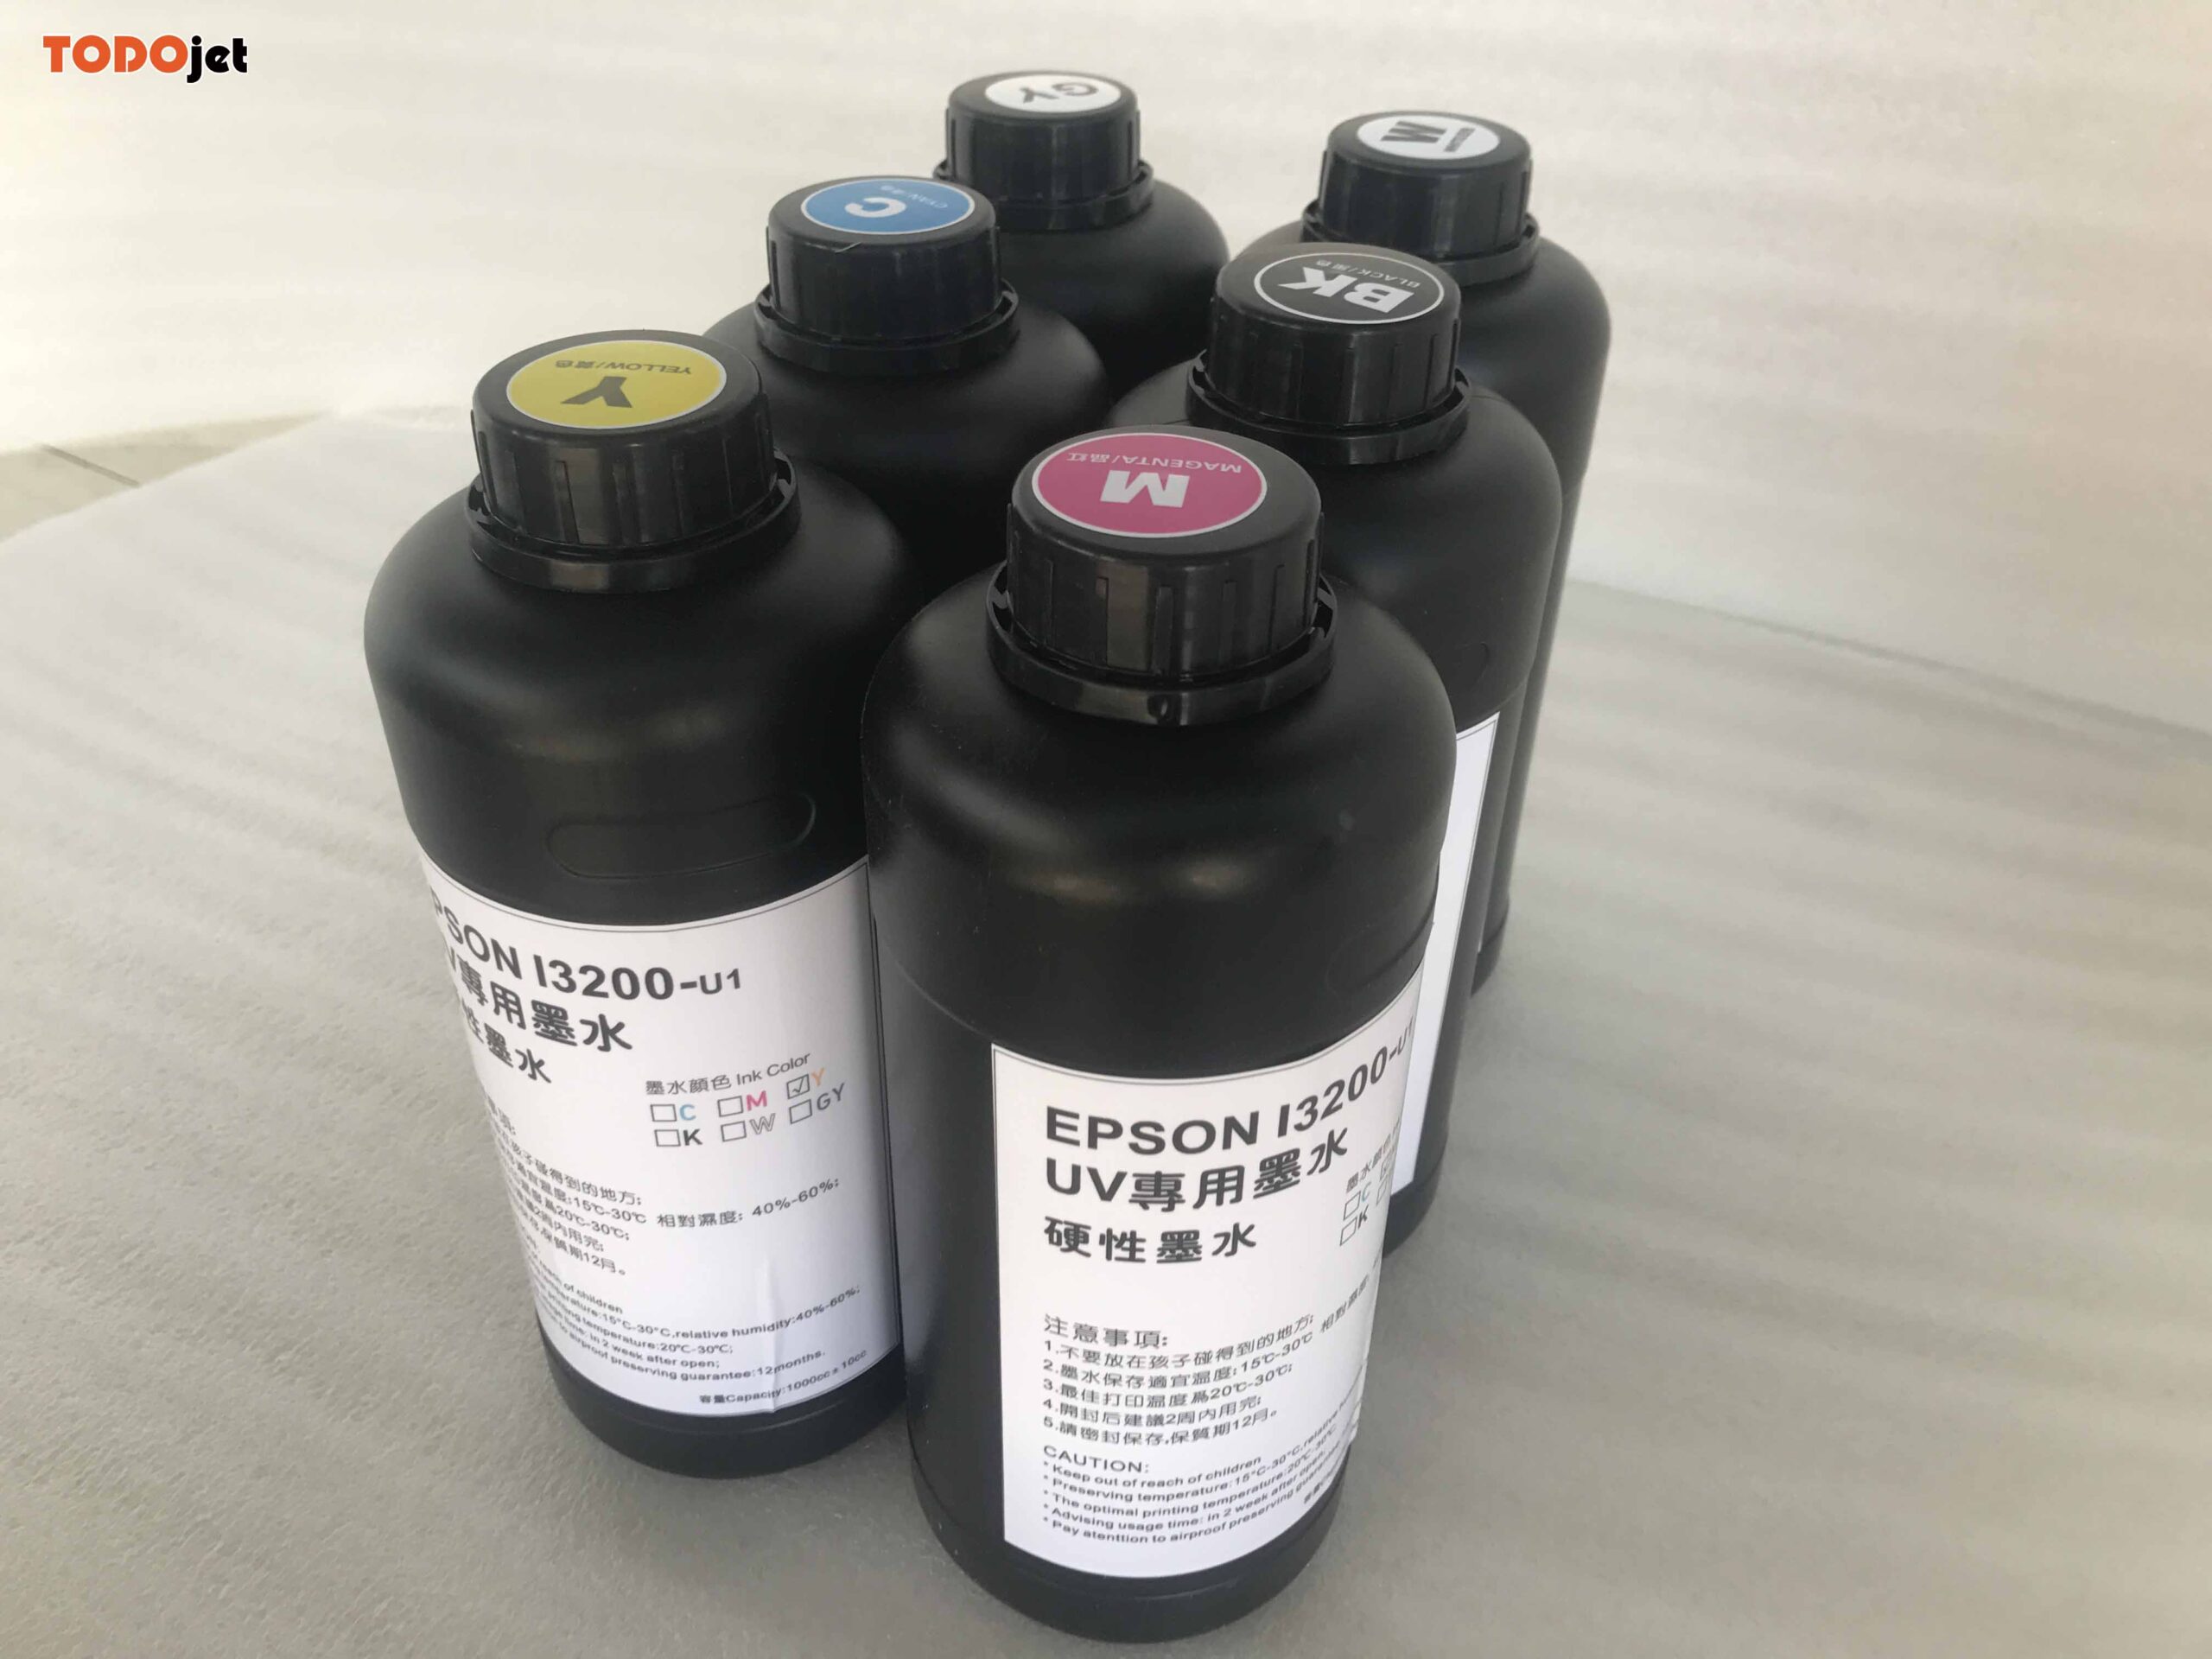 TODOjet 6 Colors UV Ink Soft Hard UV Print Ink Price For Printer For Epson 1390 TX800 L800 Printing on PVC and Glass Sheet